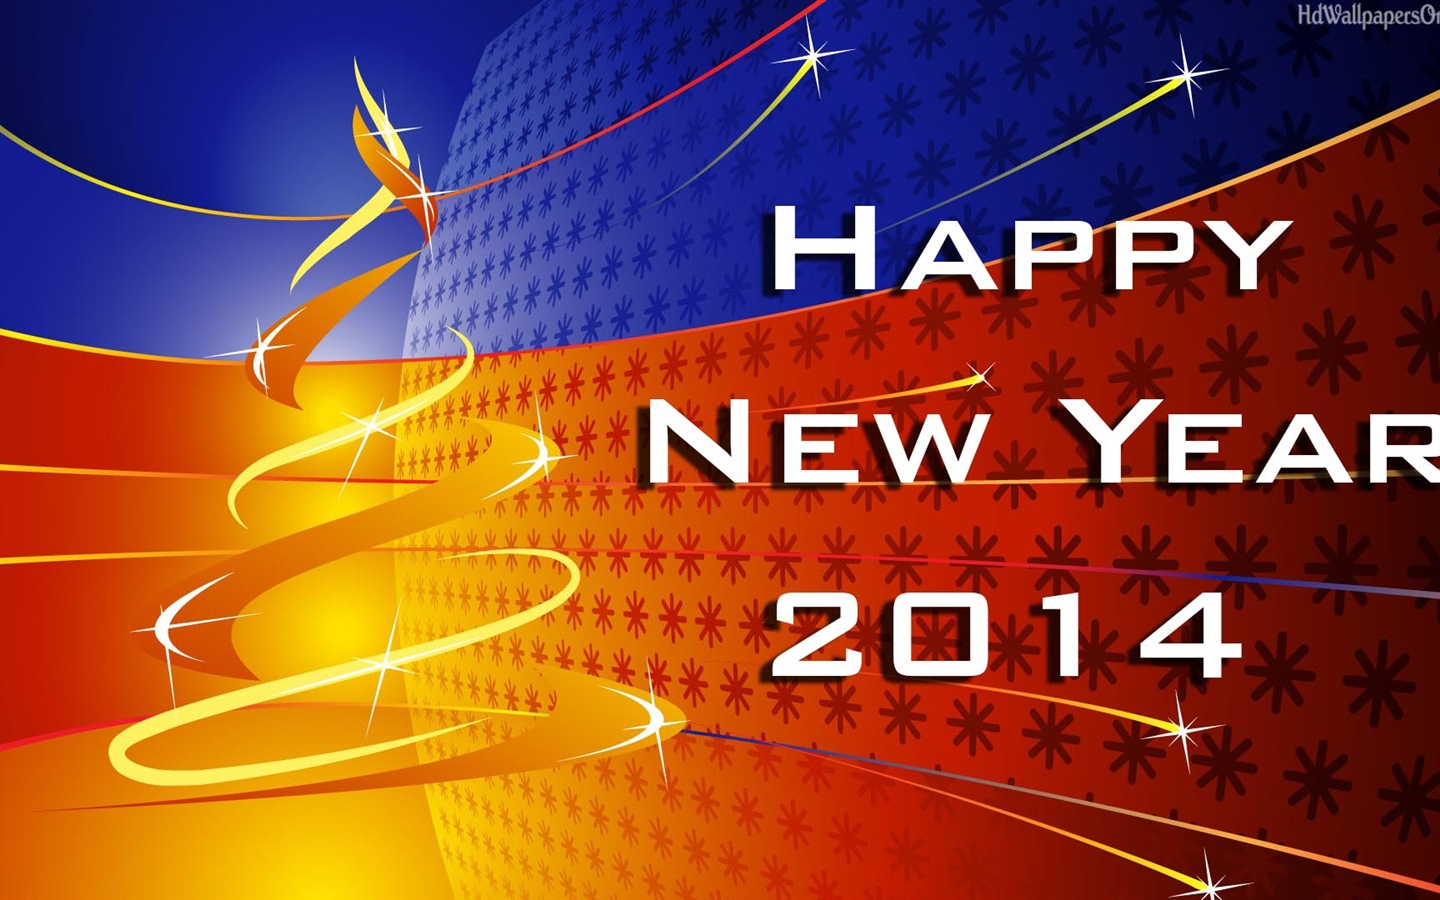 2014 New Year Theme HD Wallpapers (1) #14 - 1440x900